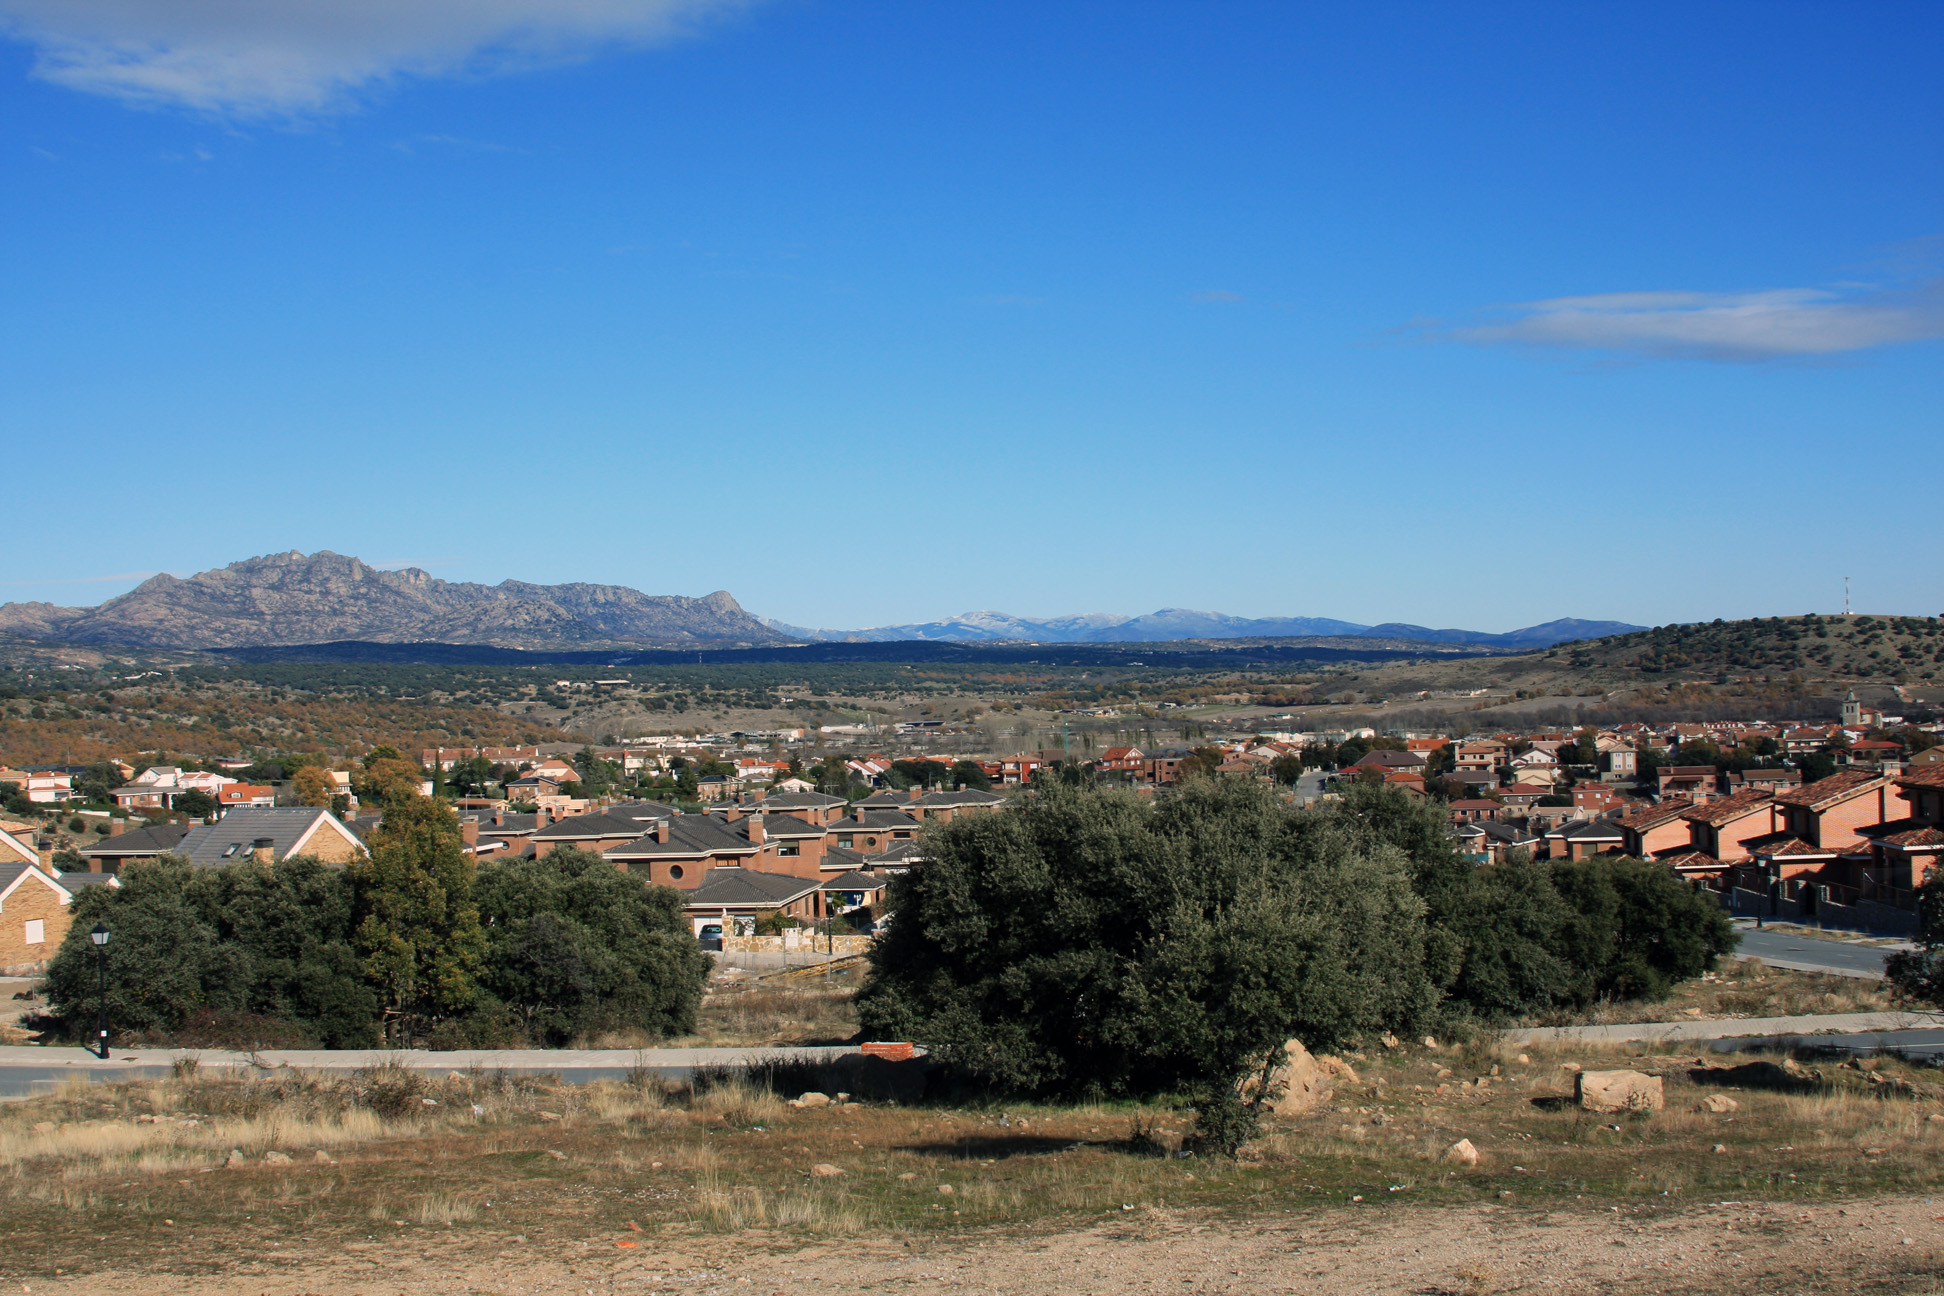 View of Guadalix, with a mountain on the horizon